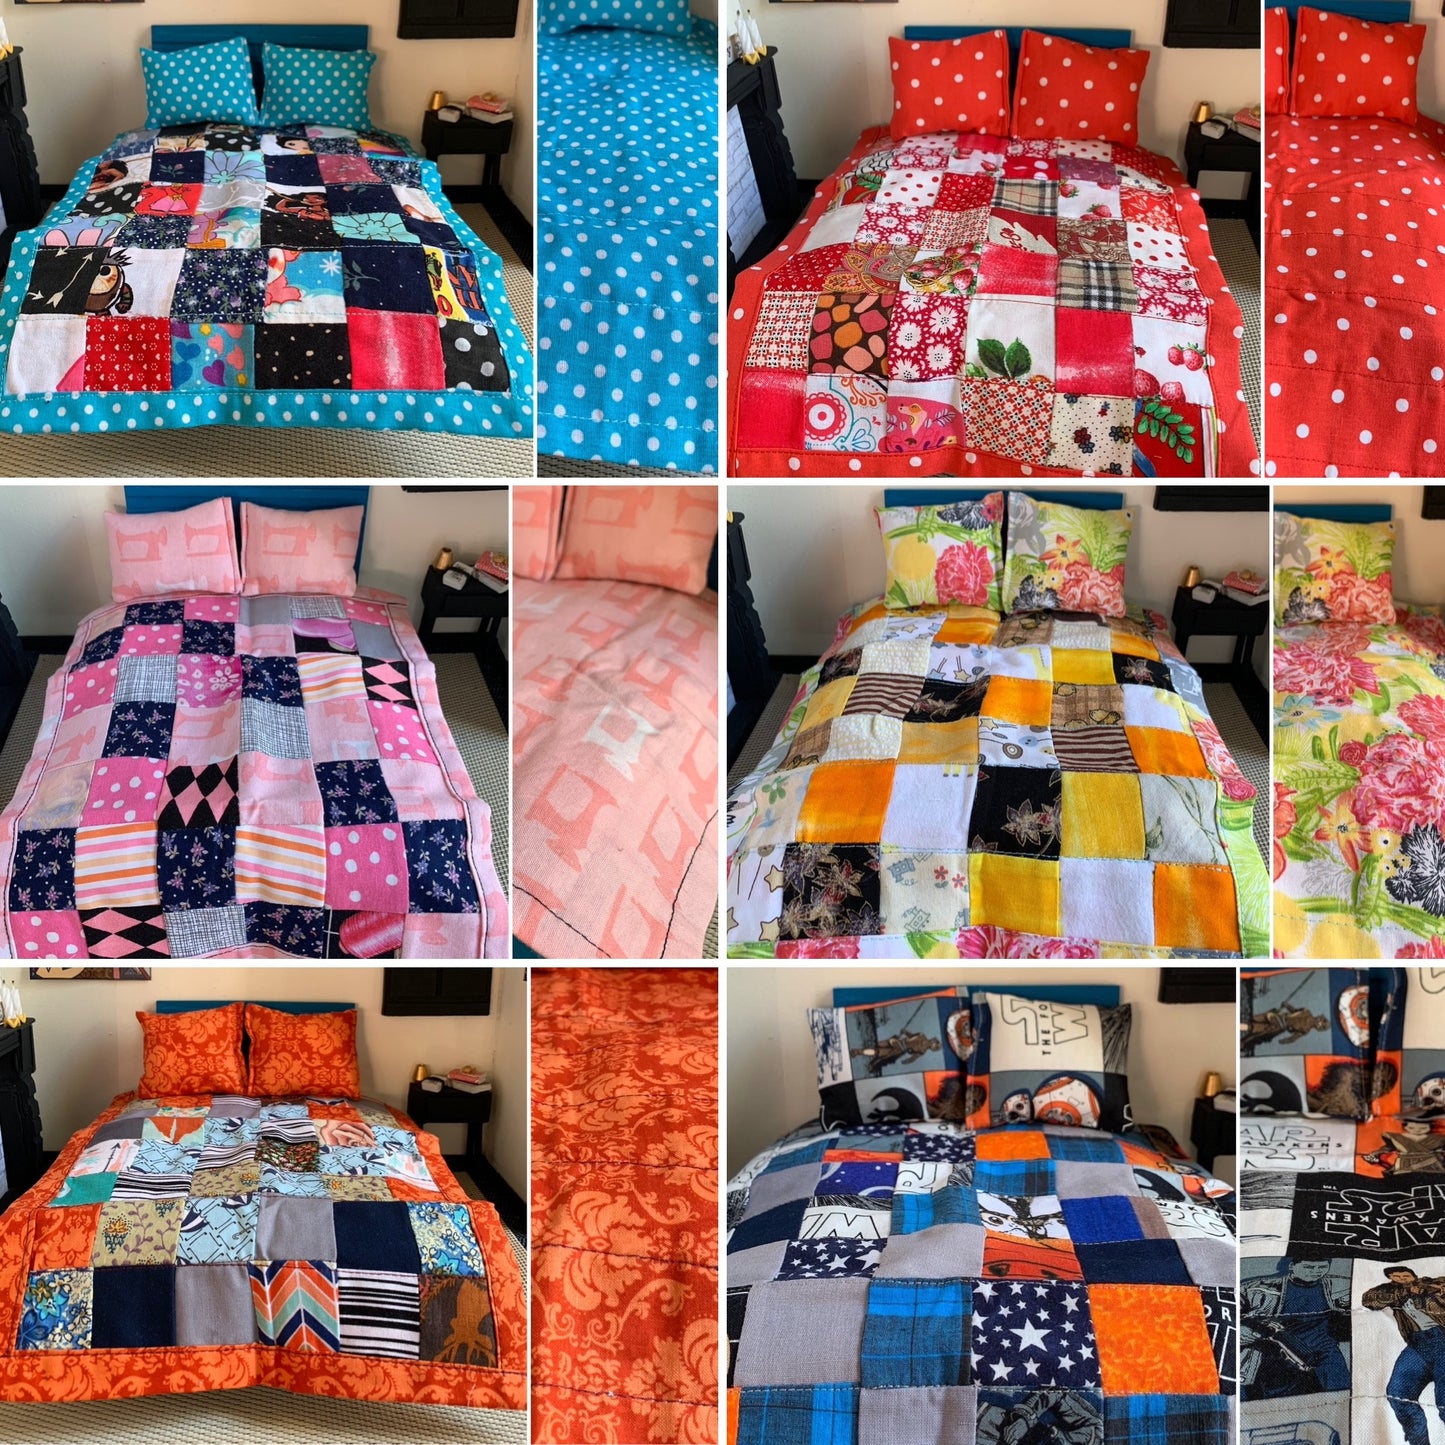 dollhouse quilt sets photo grid, each one has the back of the quilt next to the quilt and pillows on a miniature bed